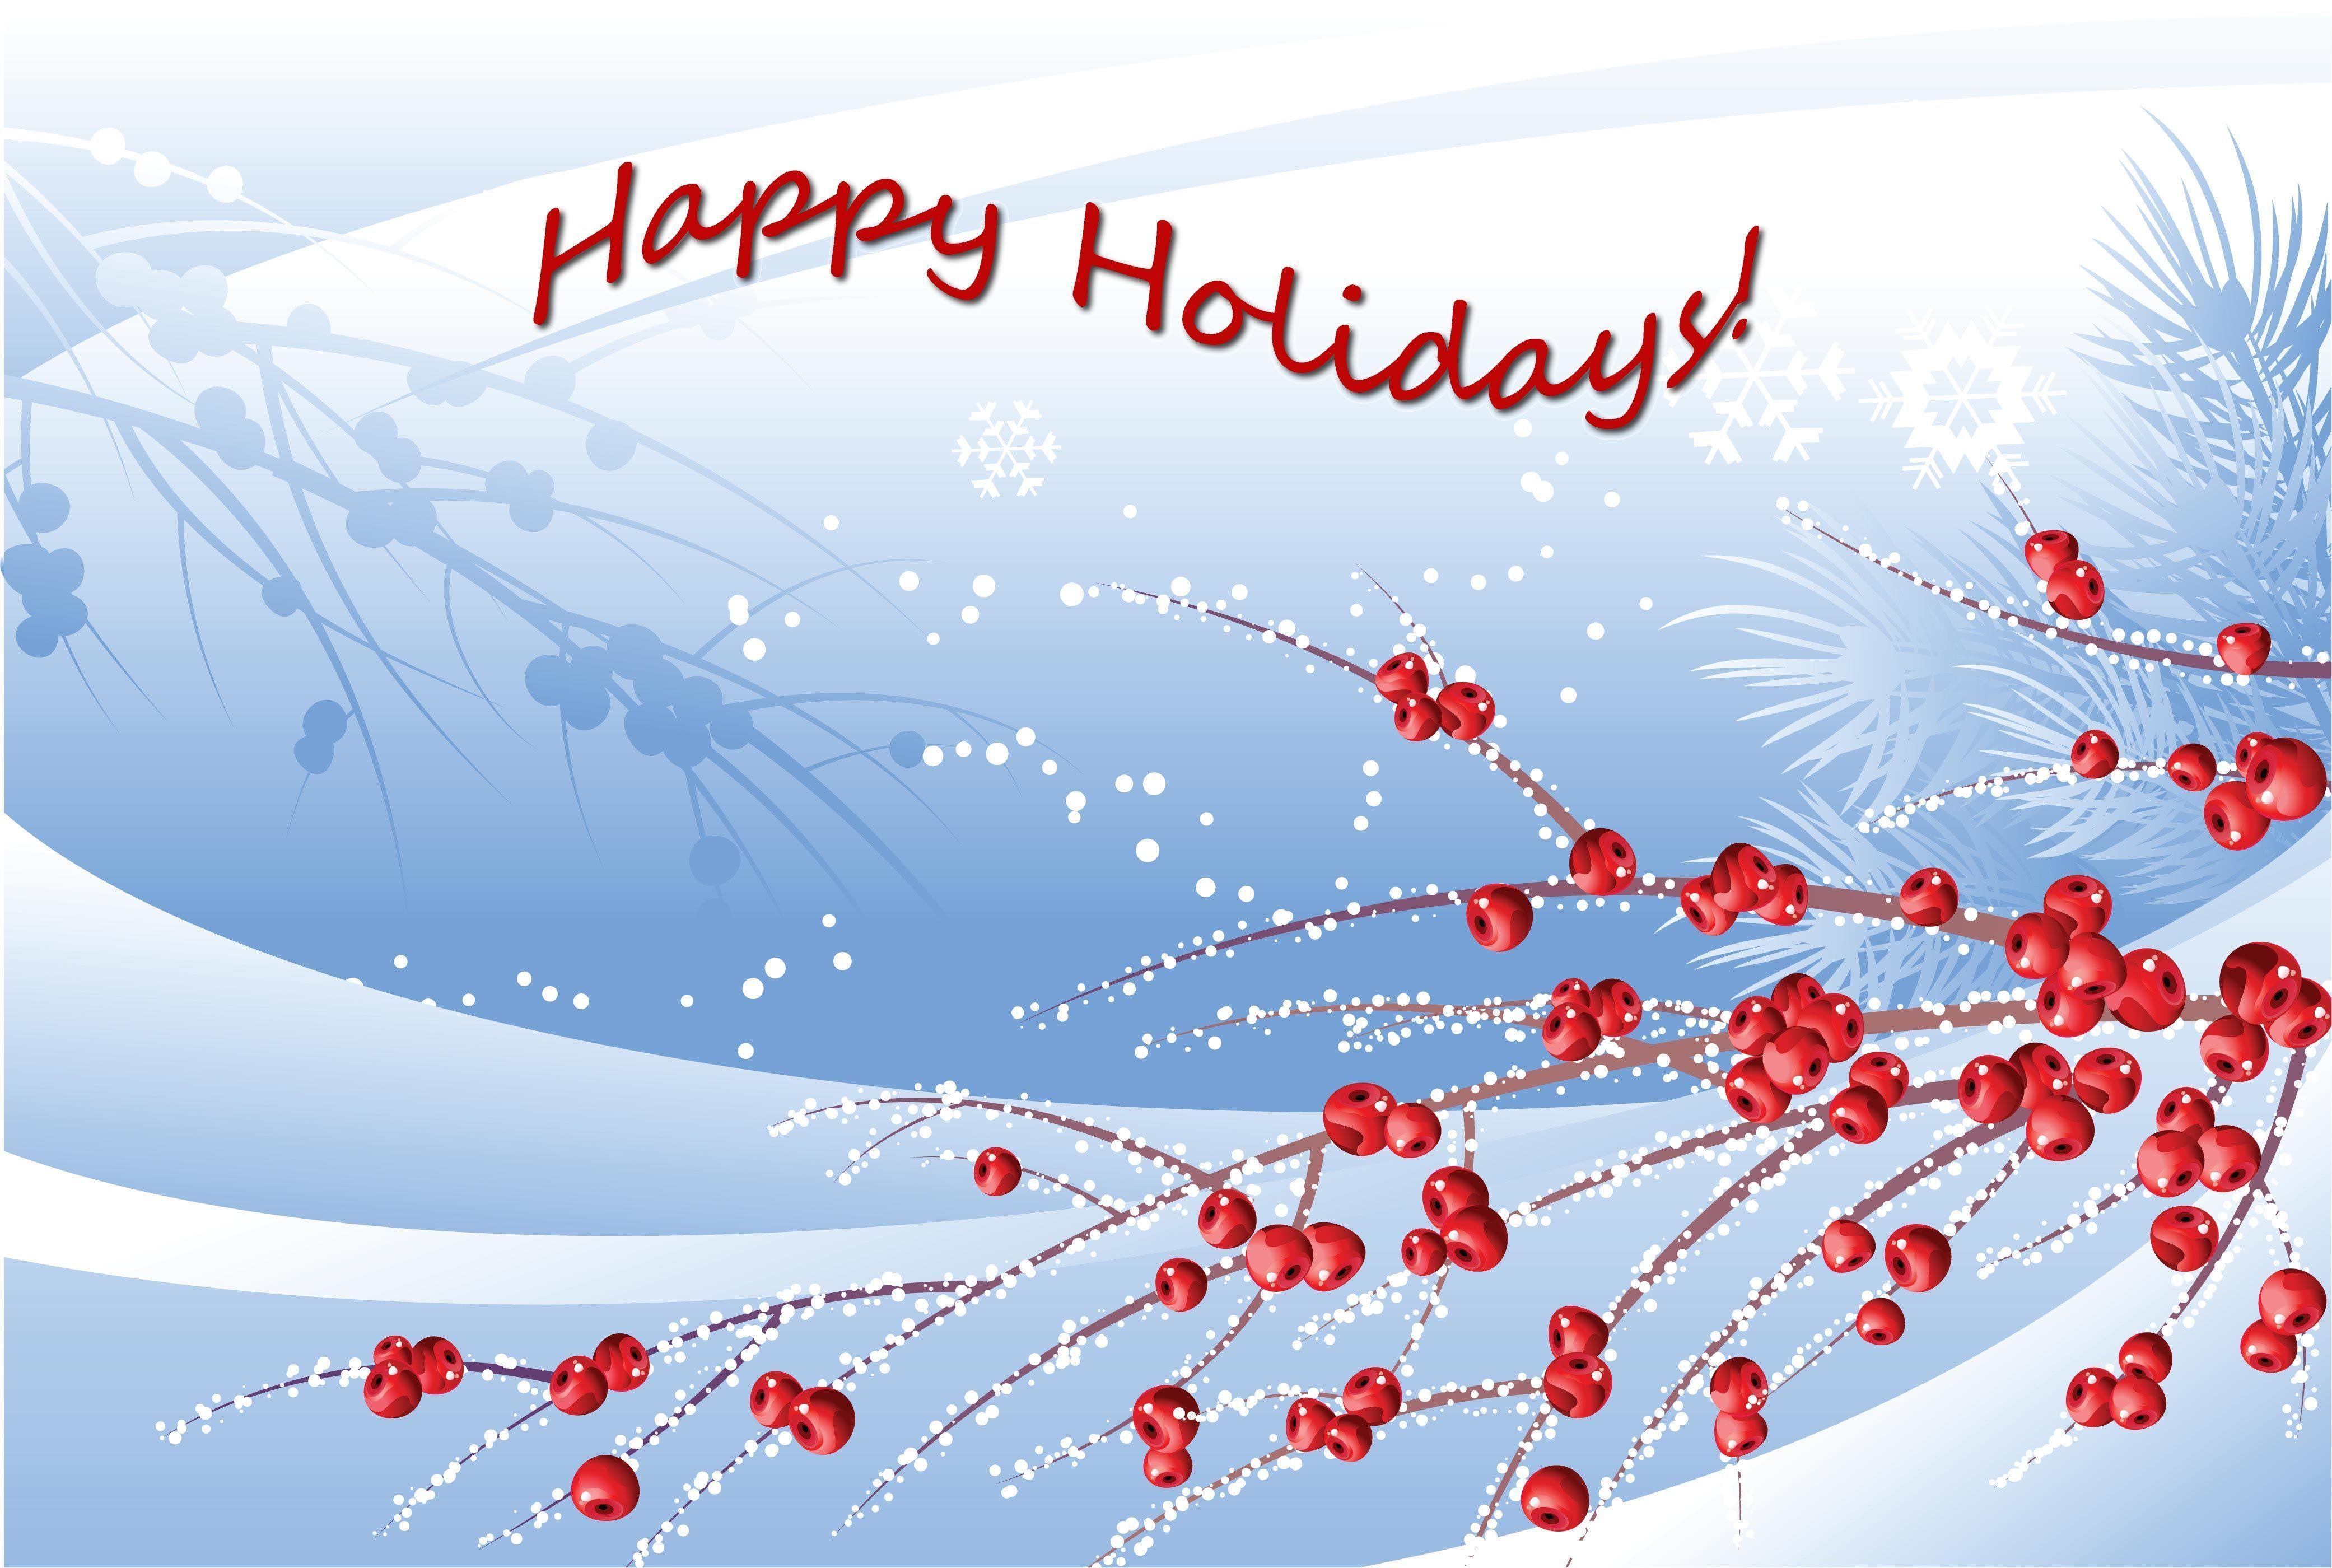 Happy Holidays Wallpapers Wallpaper Cave